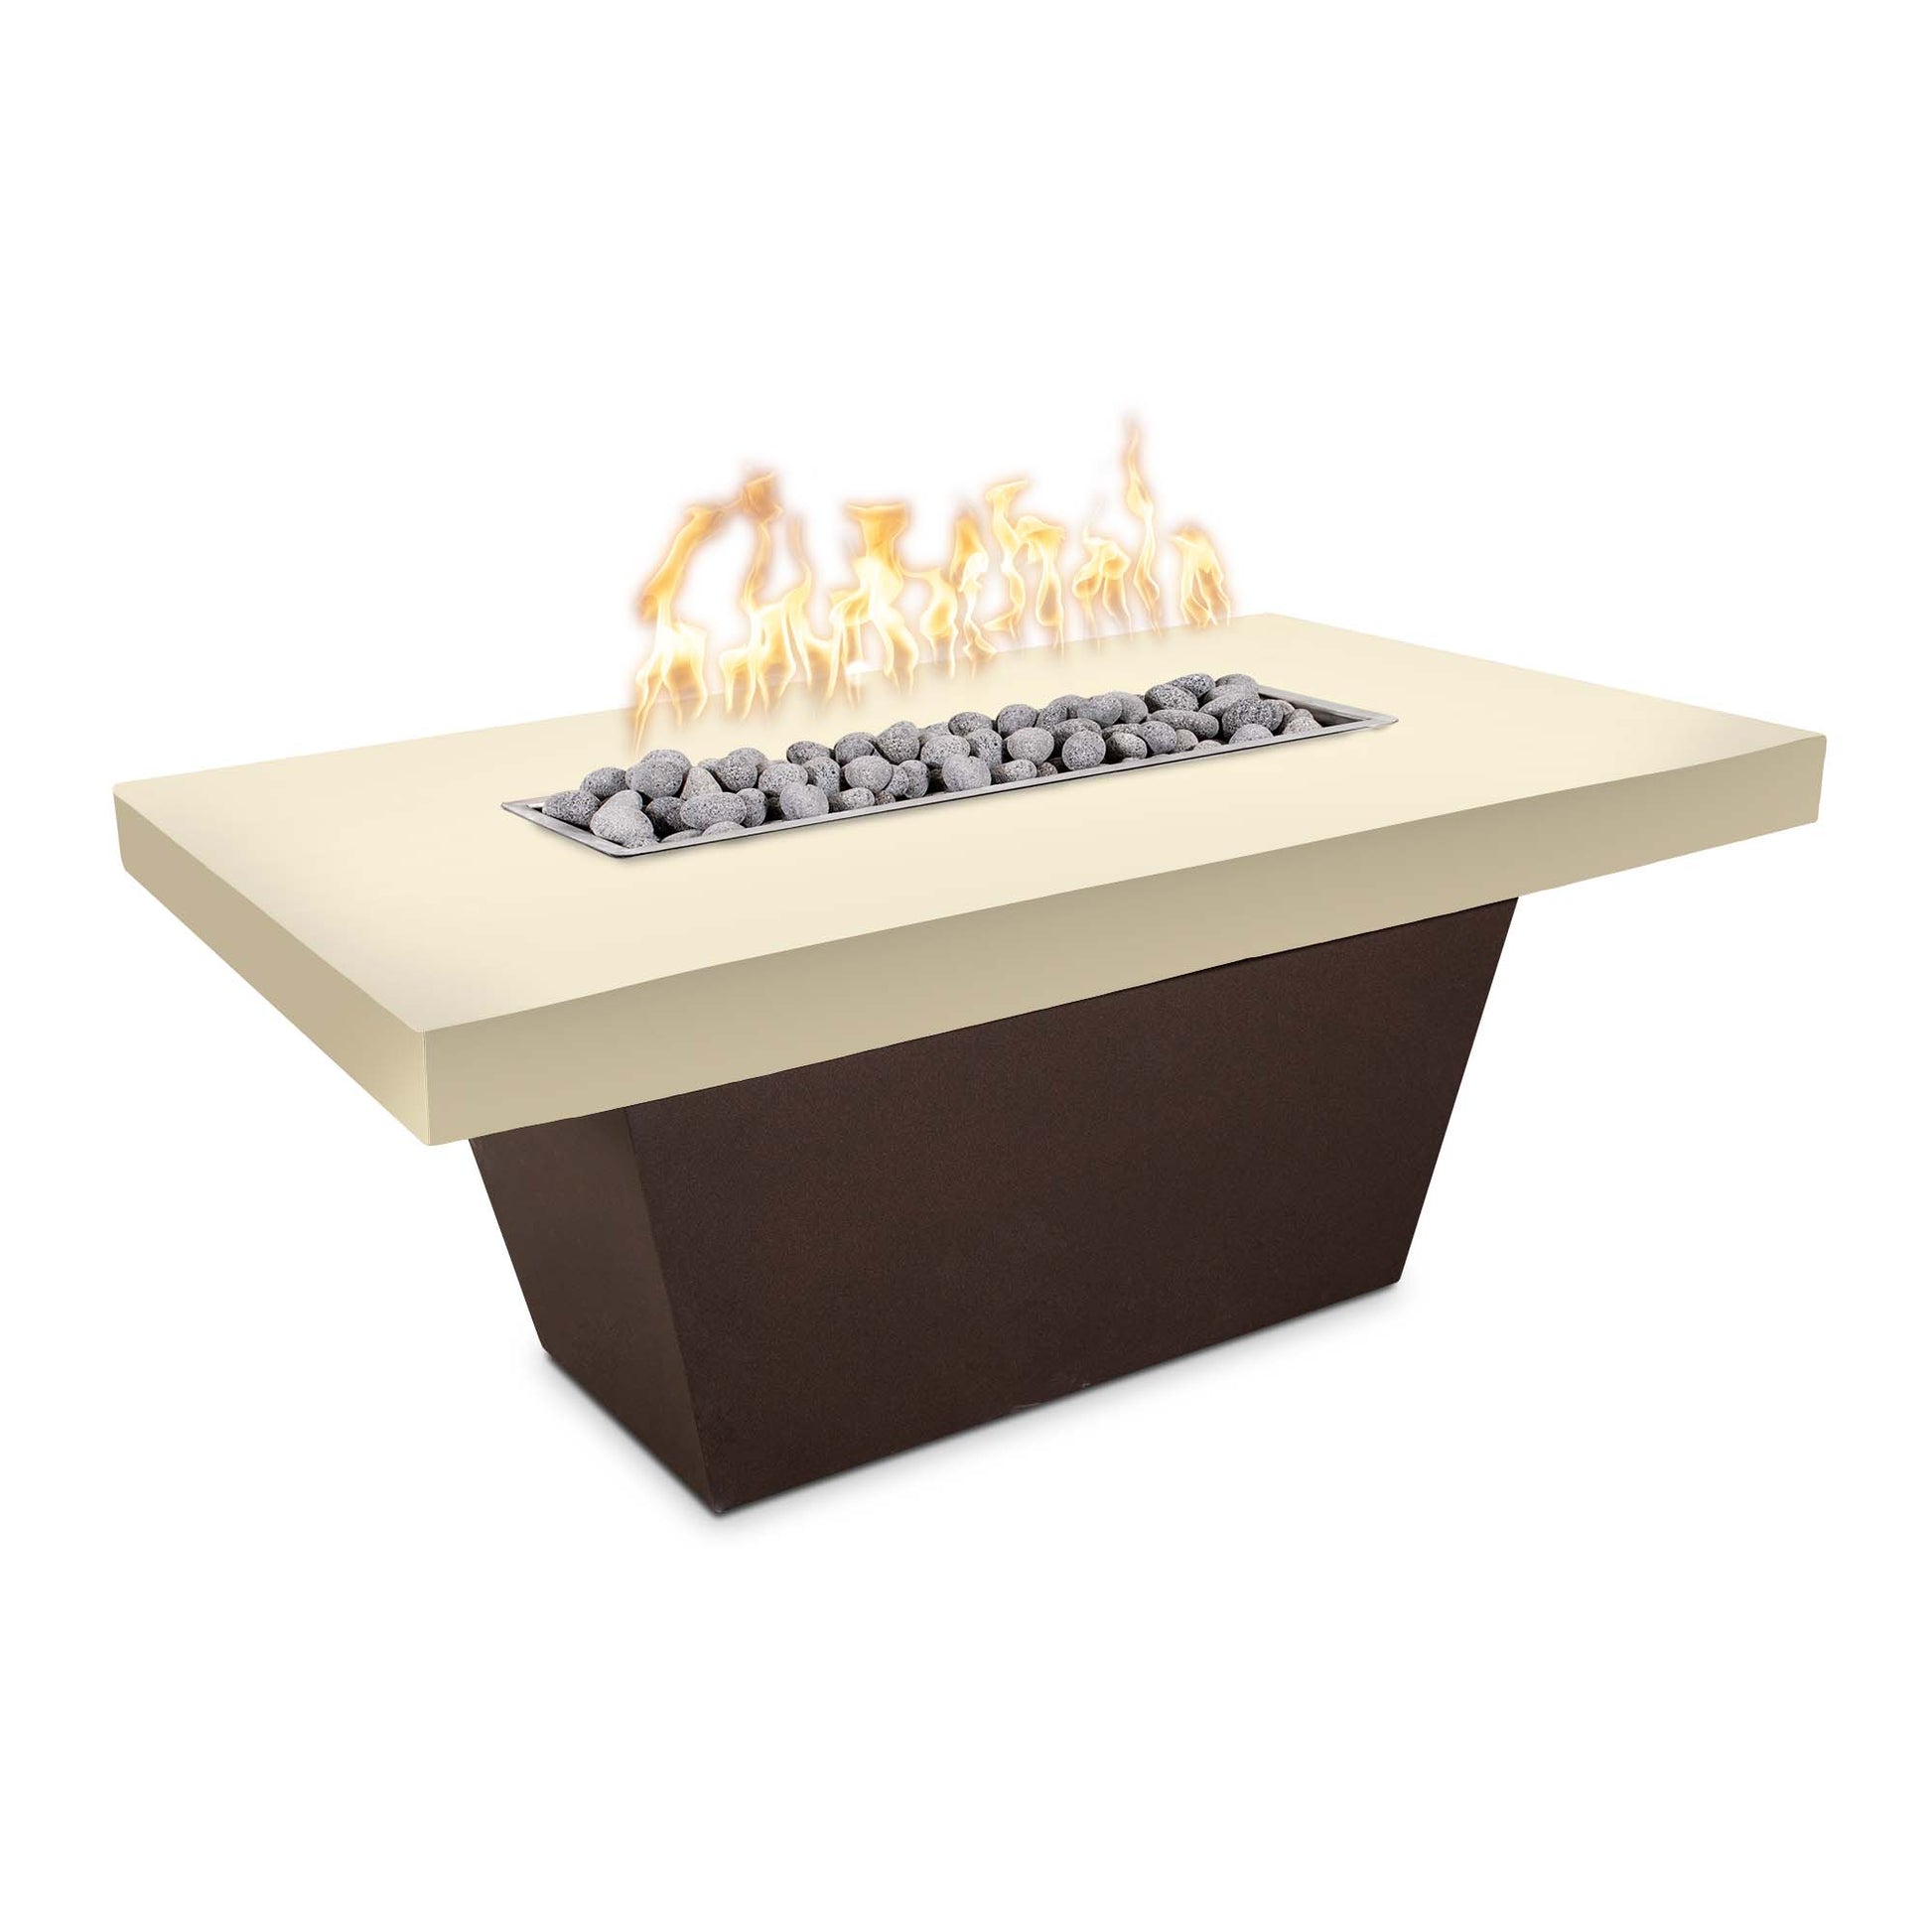 The Outdoor Plus Tacoma 48" White Limestone Concrete Top & Java Powder Coated Base Liquid Propane Fire Table with Flame Sense with Spark Ignition